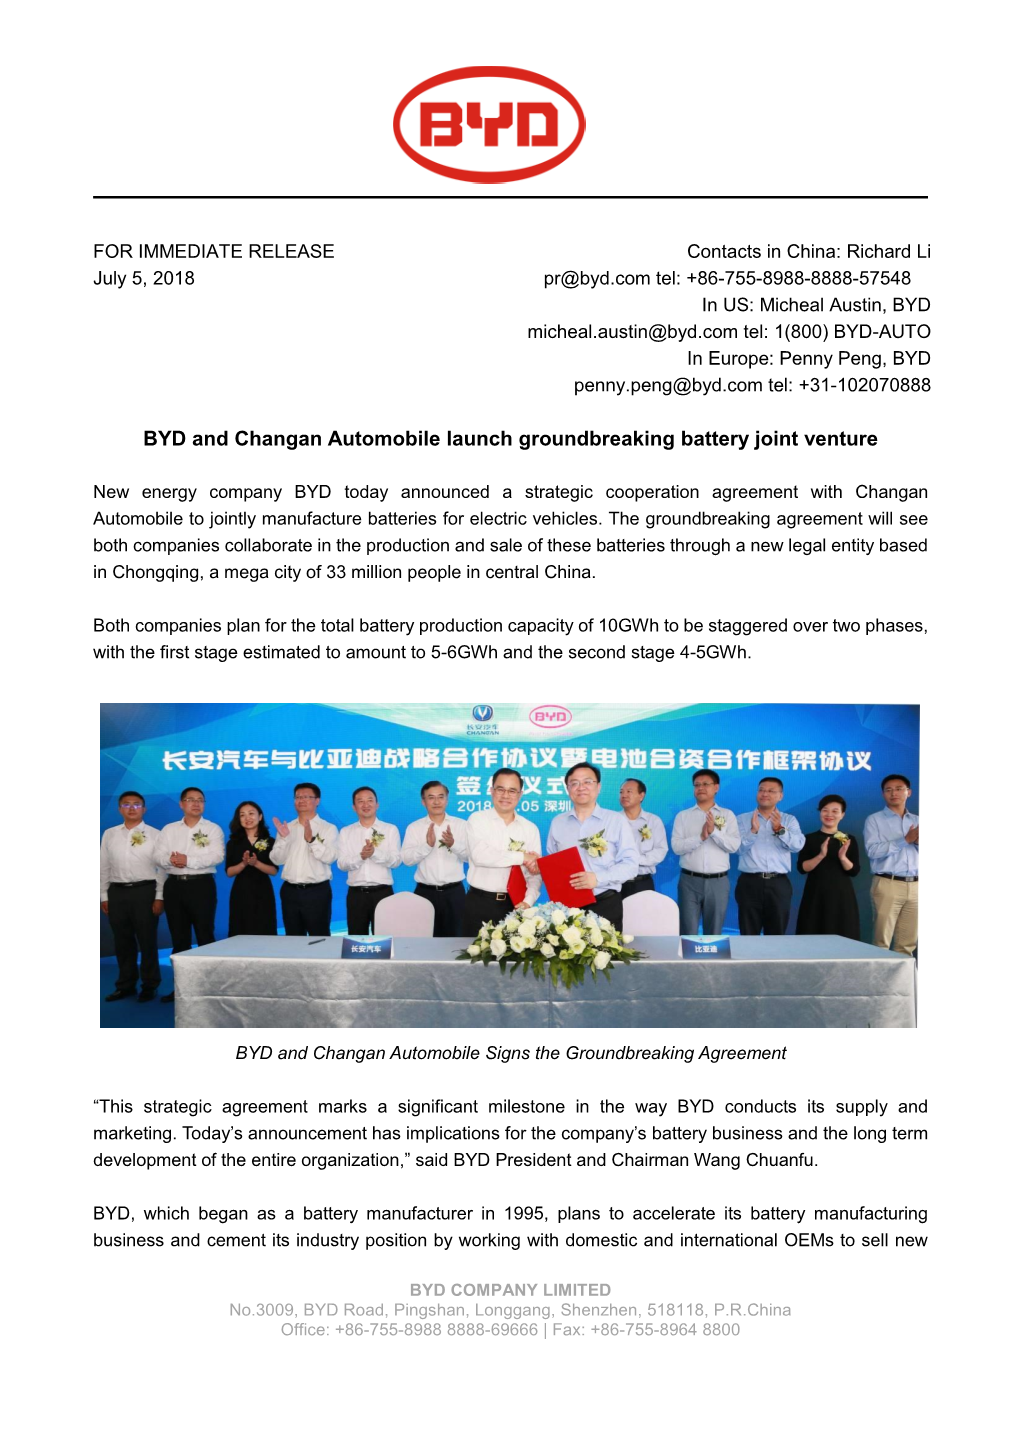 BYD and Changan Automobile Launch Groundbreaking Battery Joint Venture